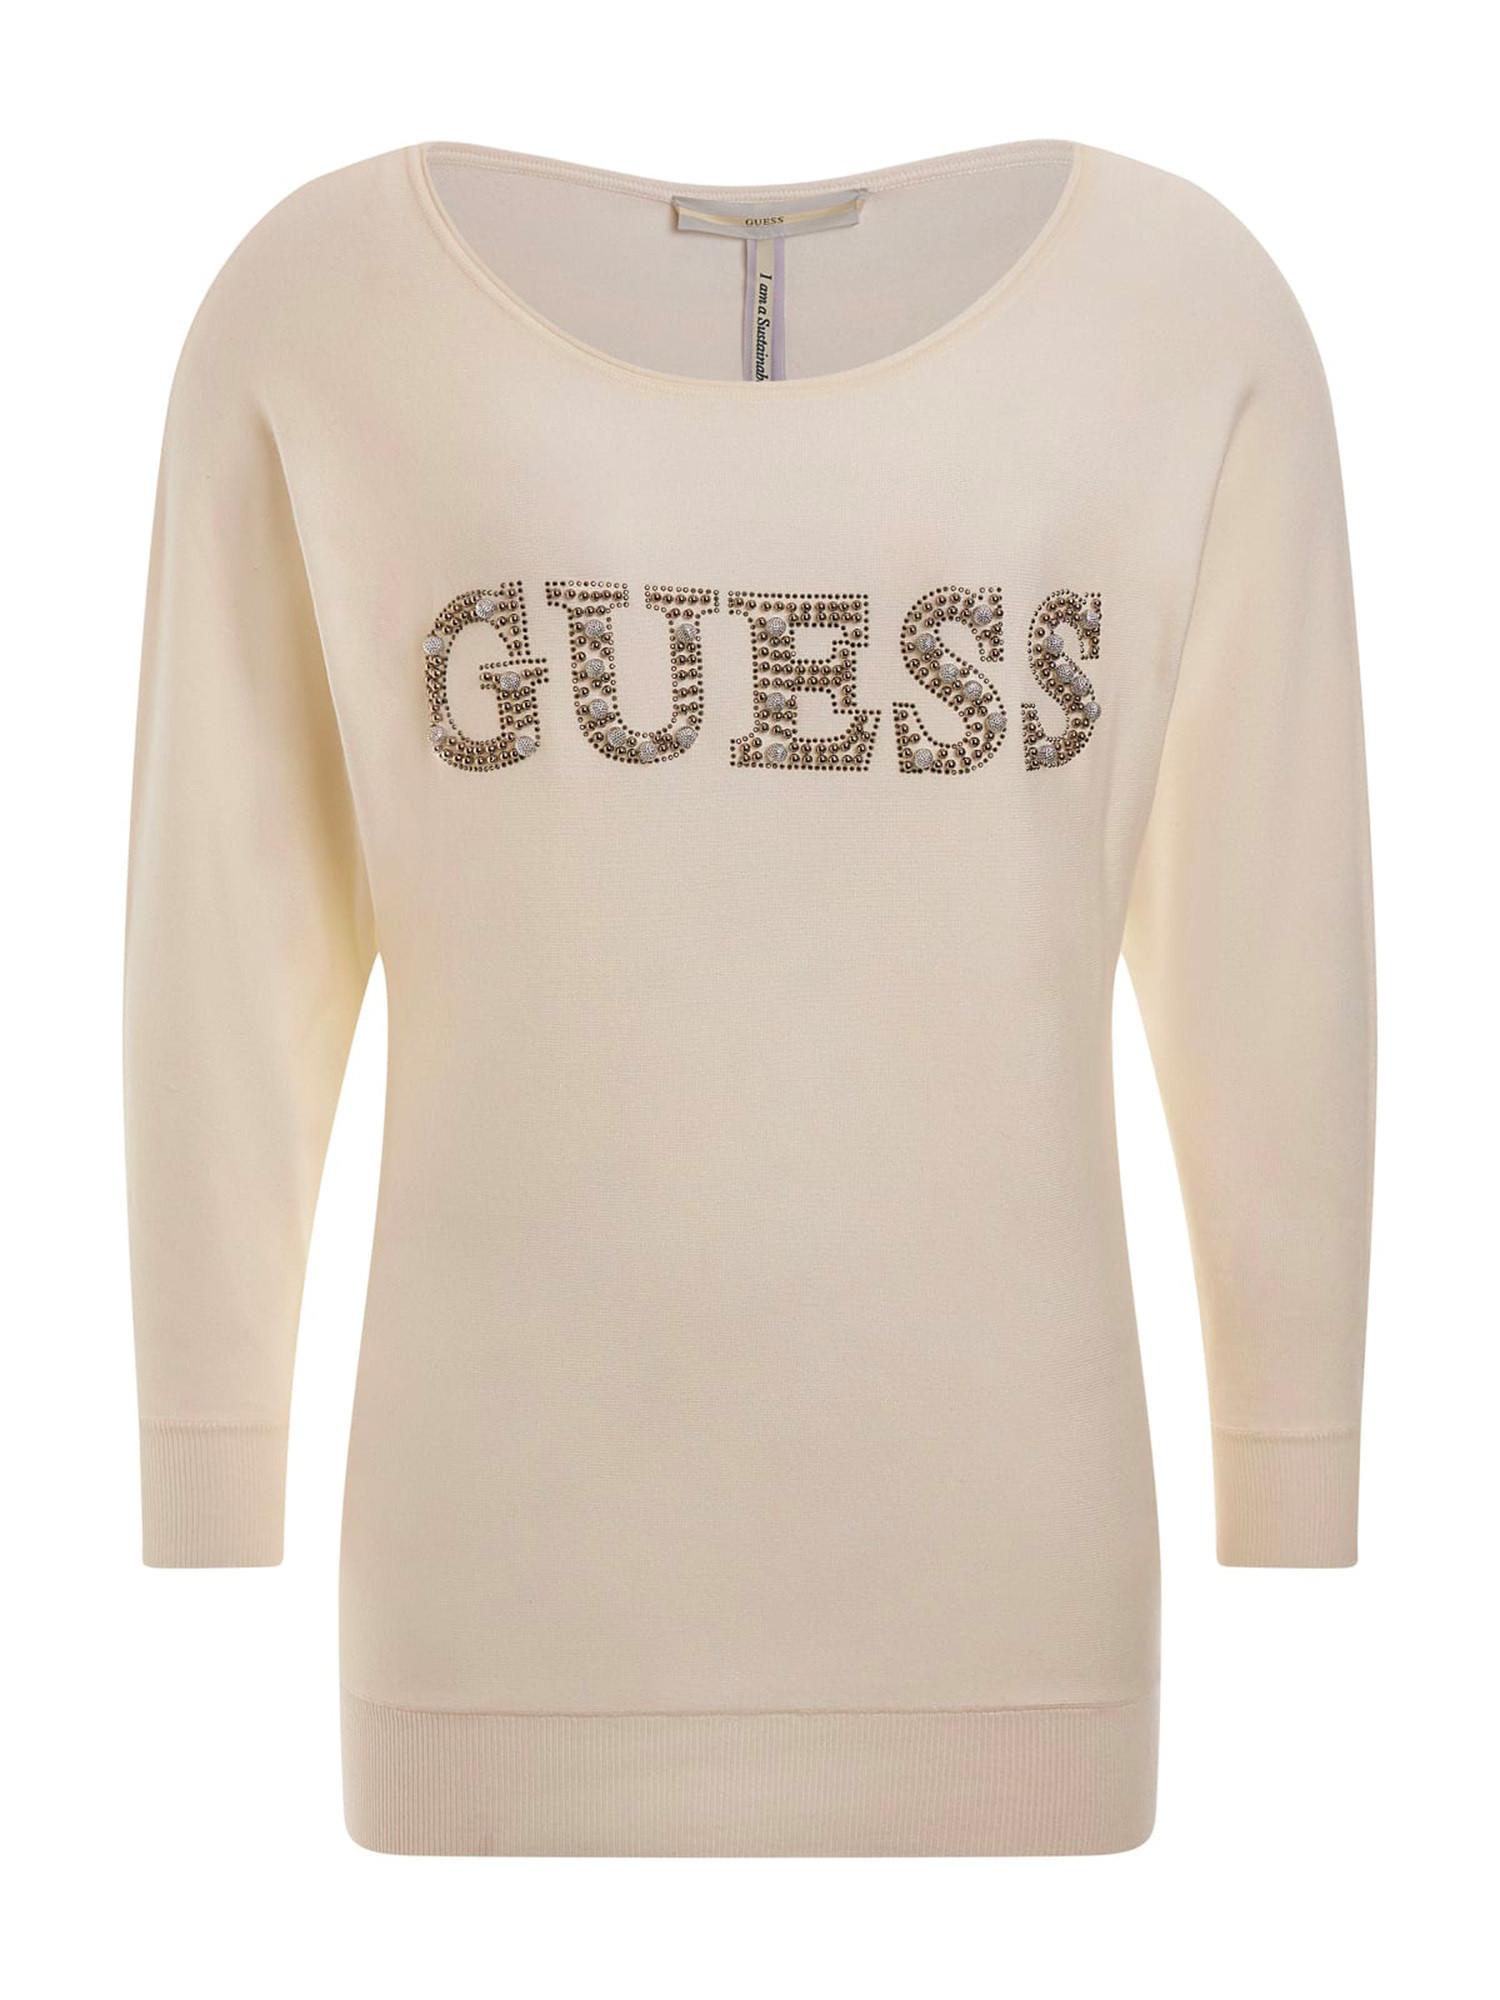 Guess - Maglione con logo con strass regular fit, Crema, large image number 0